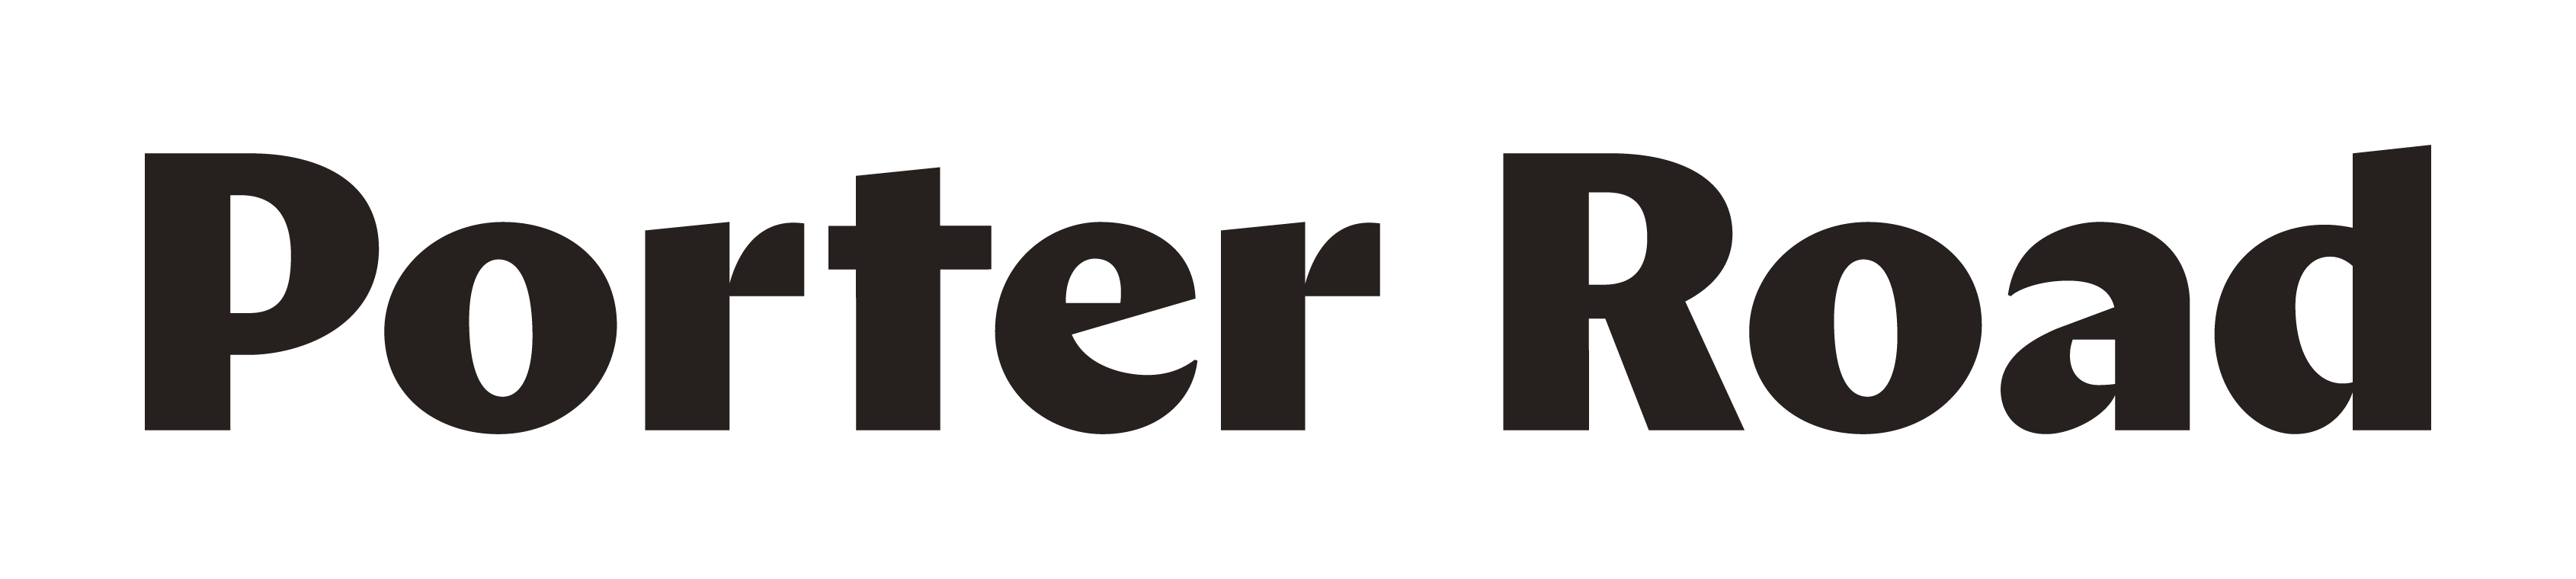 Porter Road Coupon Codes